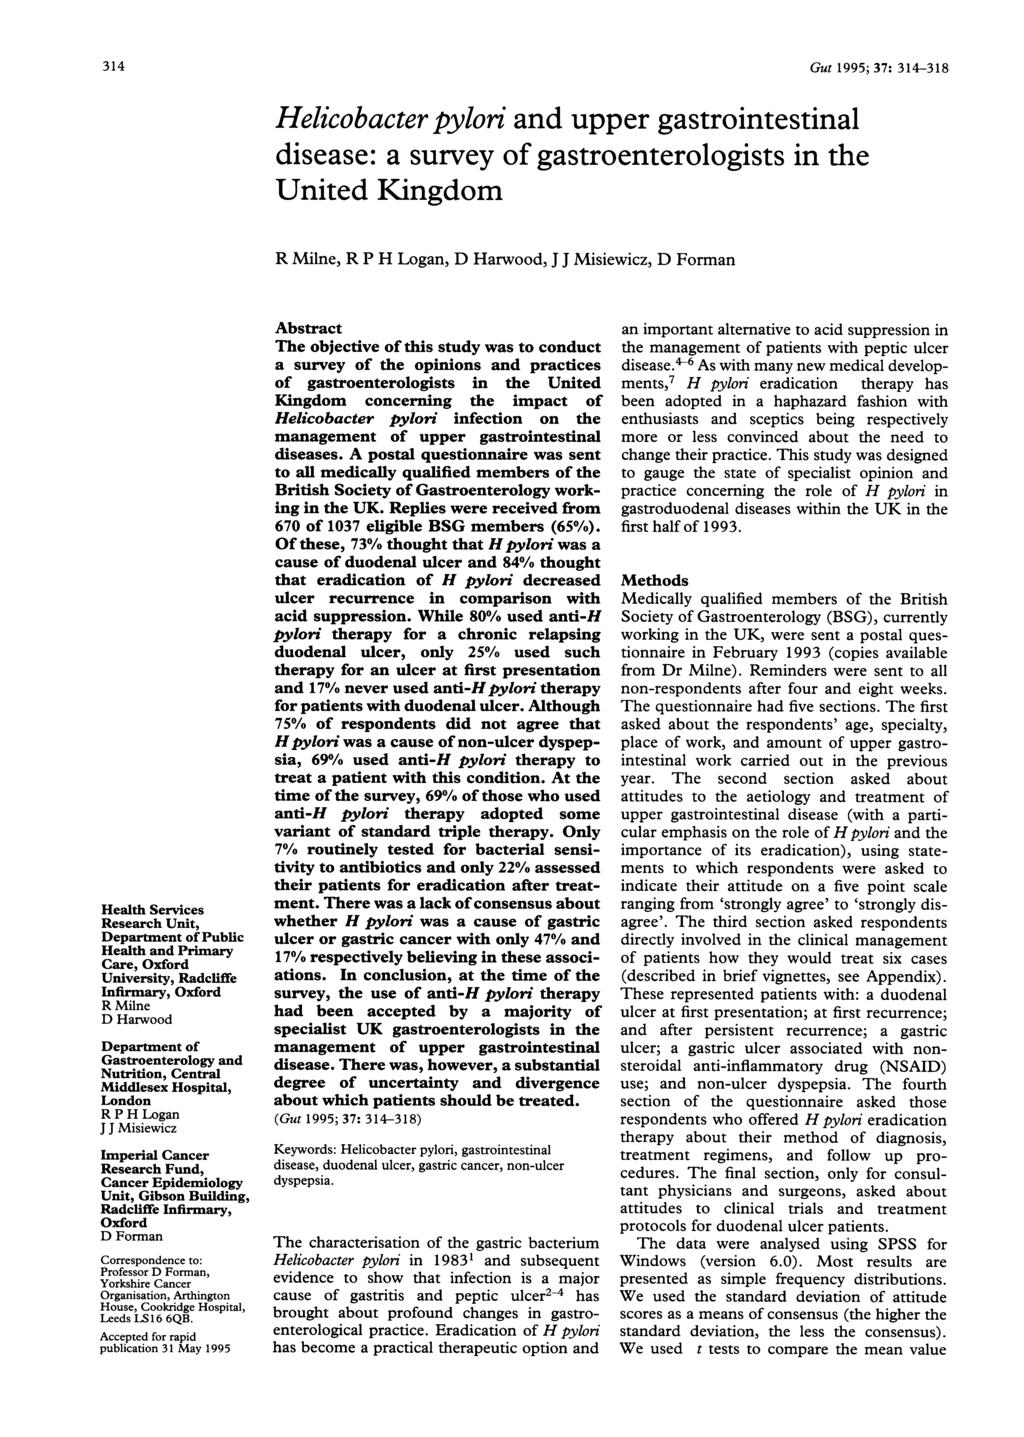 314 Helicobacter pyloni and upper gastrointestinal disease: a survey of gastroenterologists in the United Kingdom Gut 1995; 37: 314-318 R Milne, R P H Logan, D Harwood, J J Misiewicz, D Forman Health